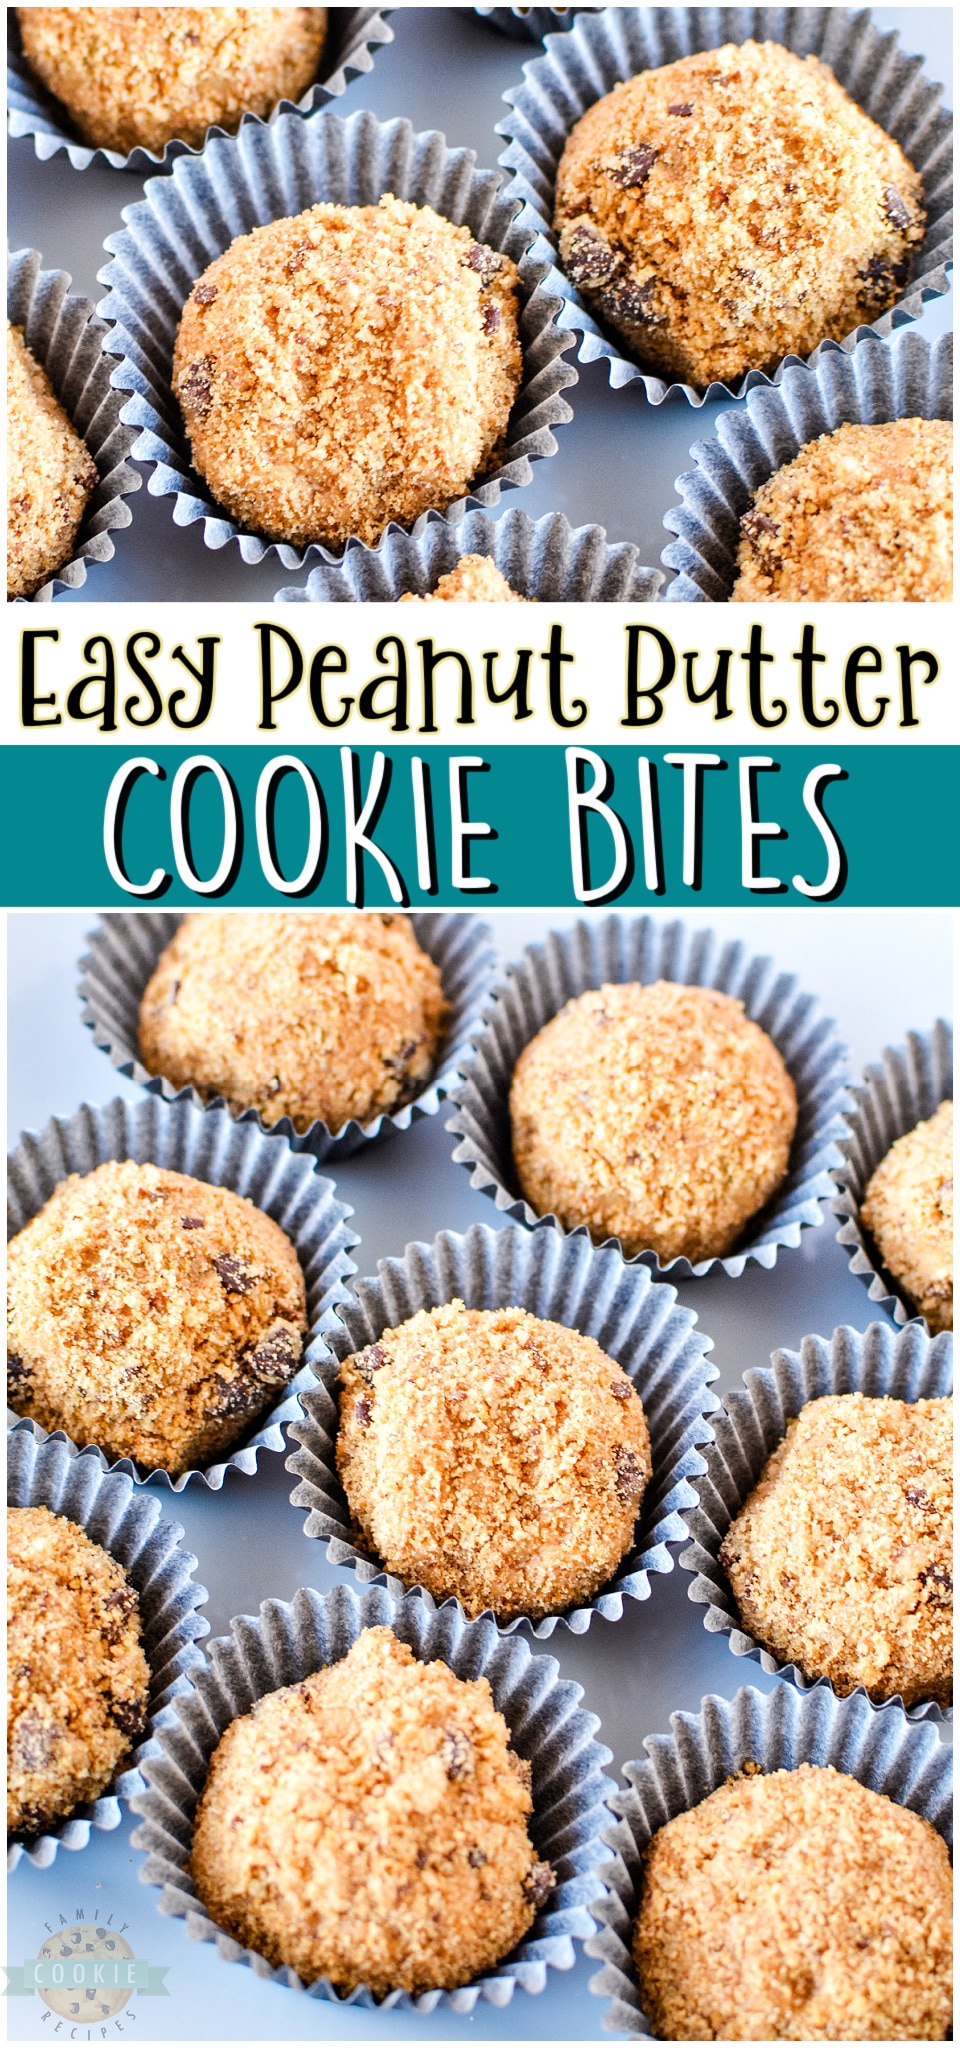 Peanut butter cookie bites made with just 3 ingredients including store-bought chocolate chip cookies, peanut butter & powdered sugar. Simple, tasty no-bake cookie recipe that is fun to make & eat! 